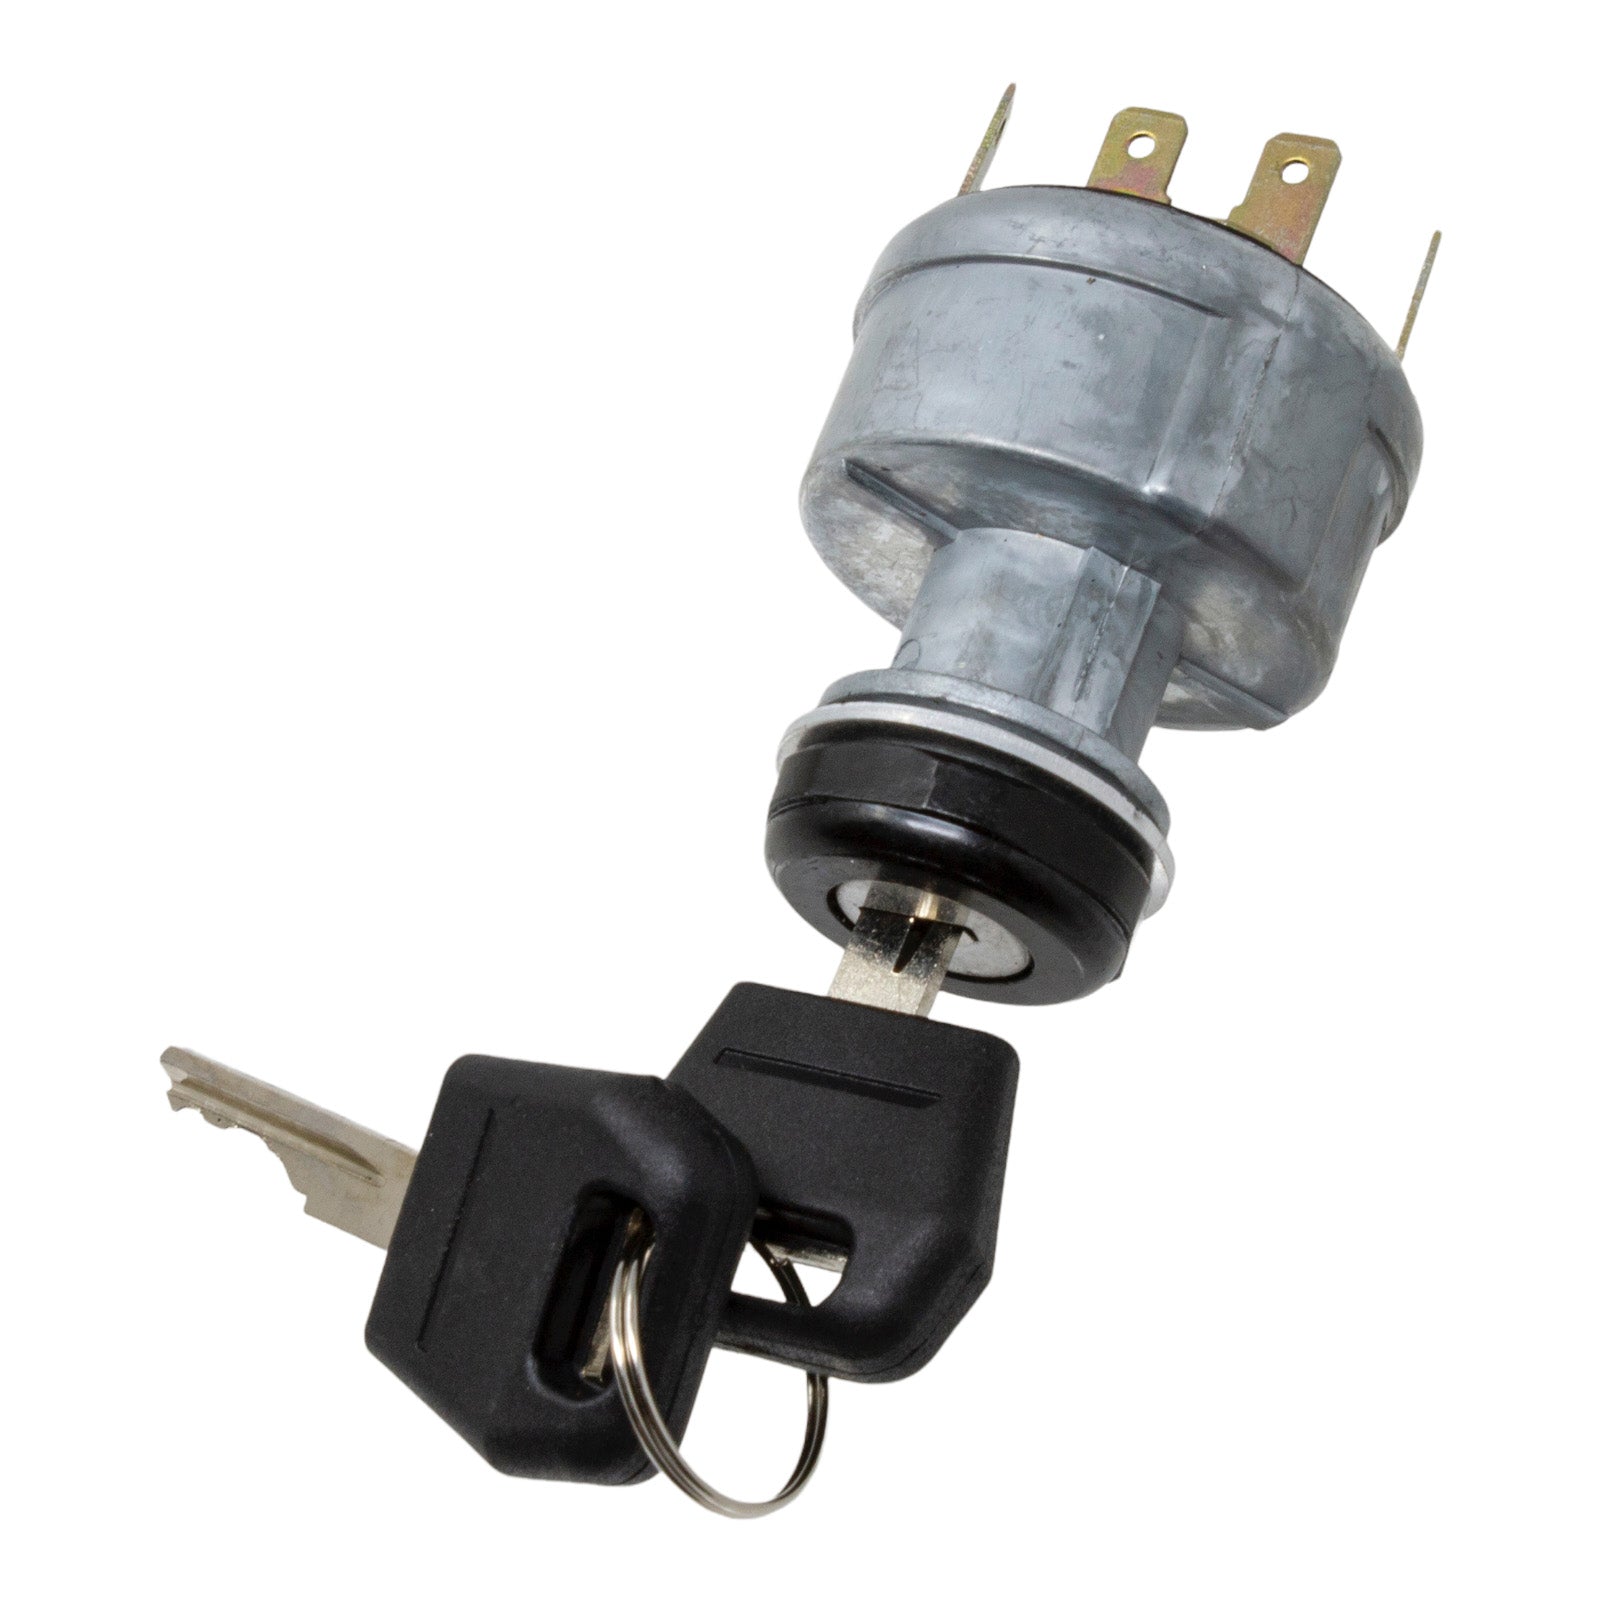 Duraforce A77312, Ignition Switch For Case IH